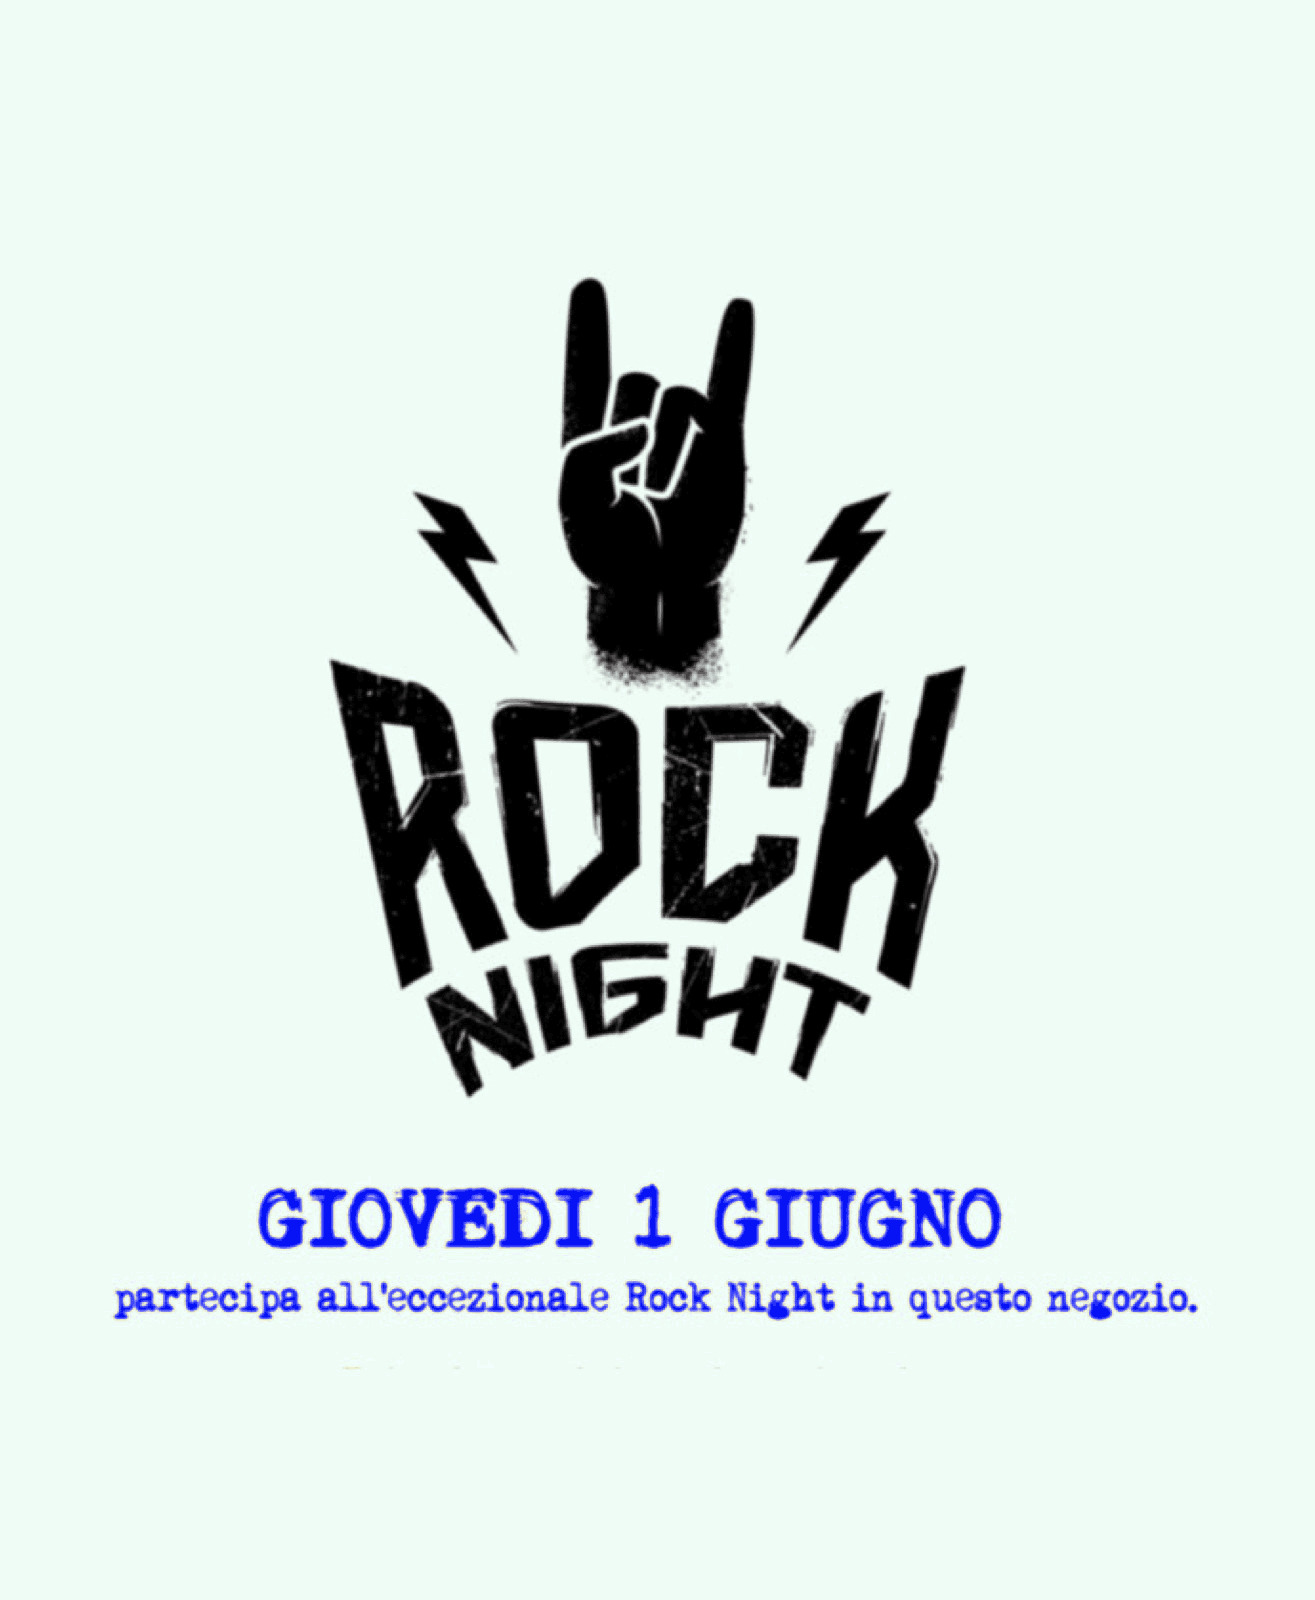 Rock Night SEMM Music Store Bologna in collaborazione con Sony Music: Foo Fighters, Hollywood Vampires, Noel Gallagher's High Flying Birds, Roger Waters e Bob Dylan